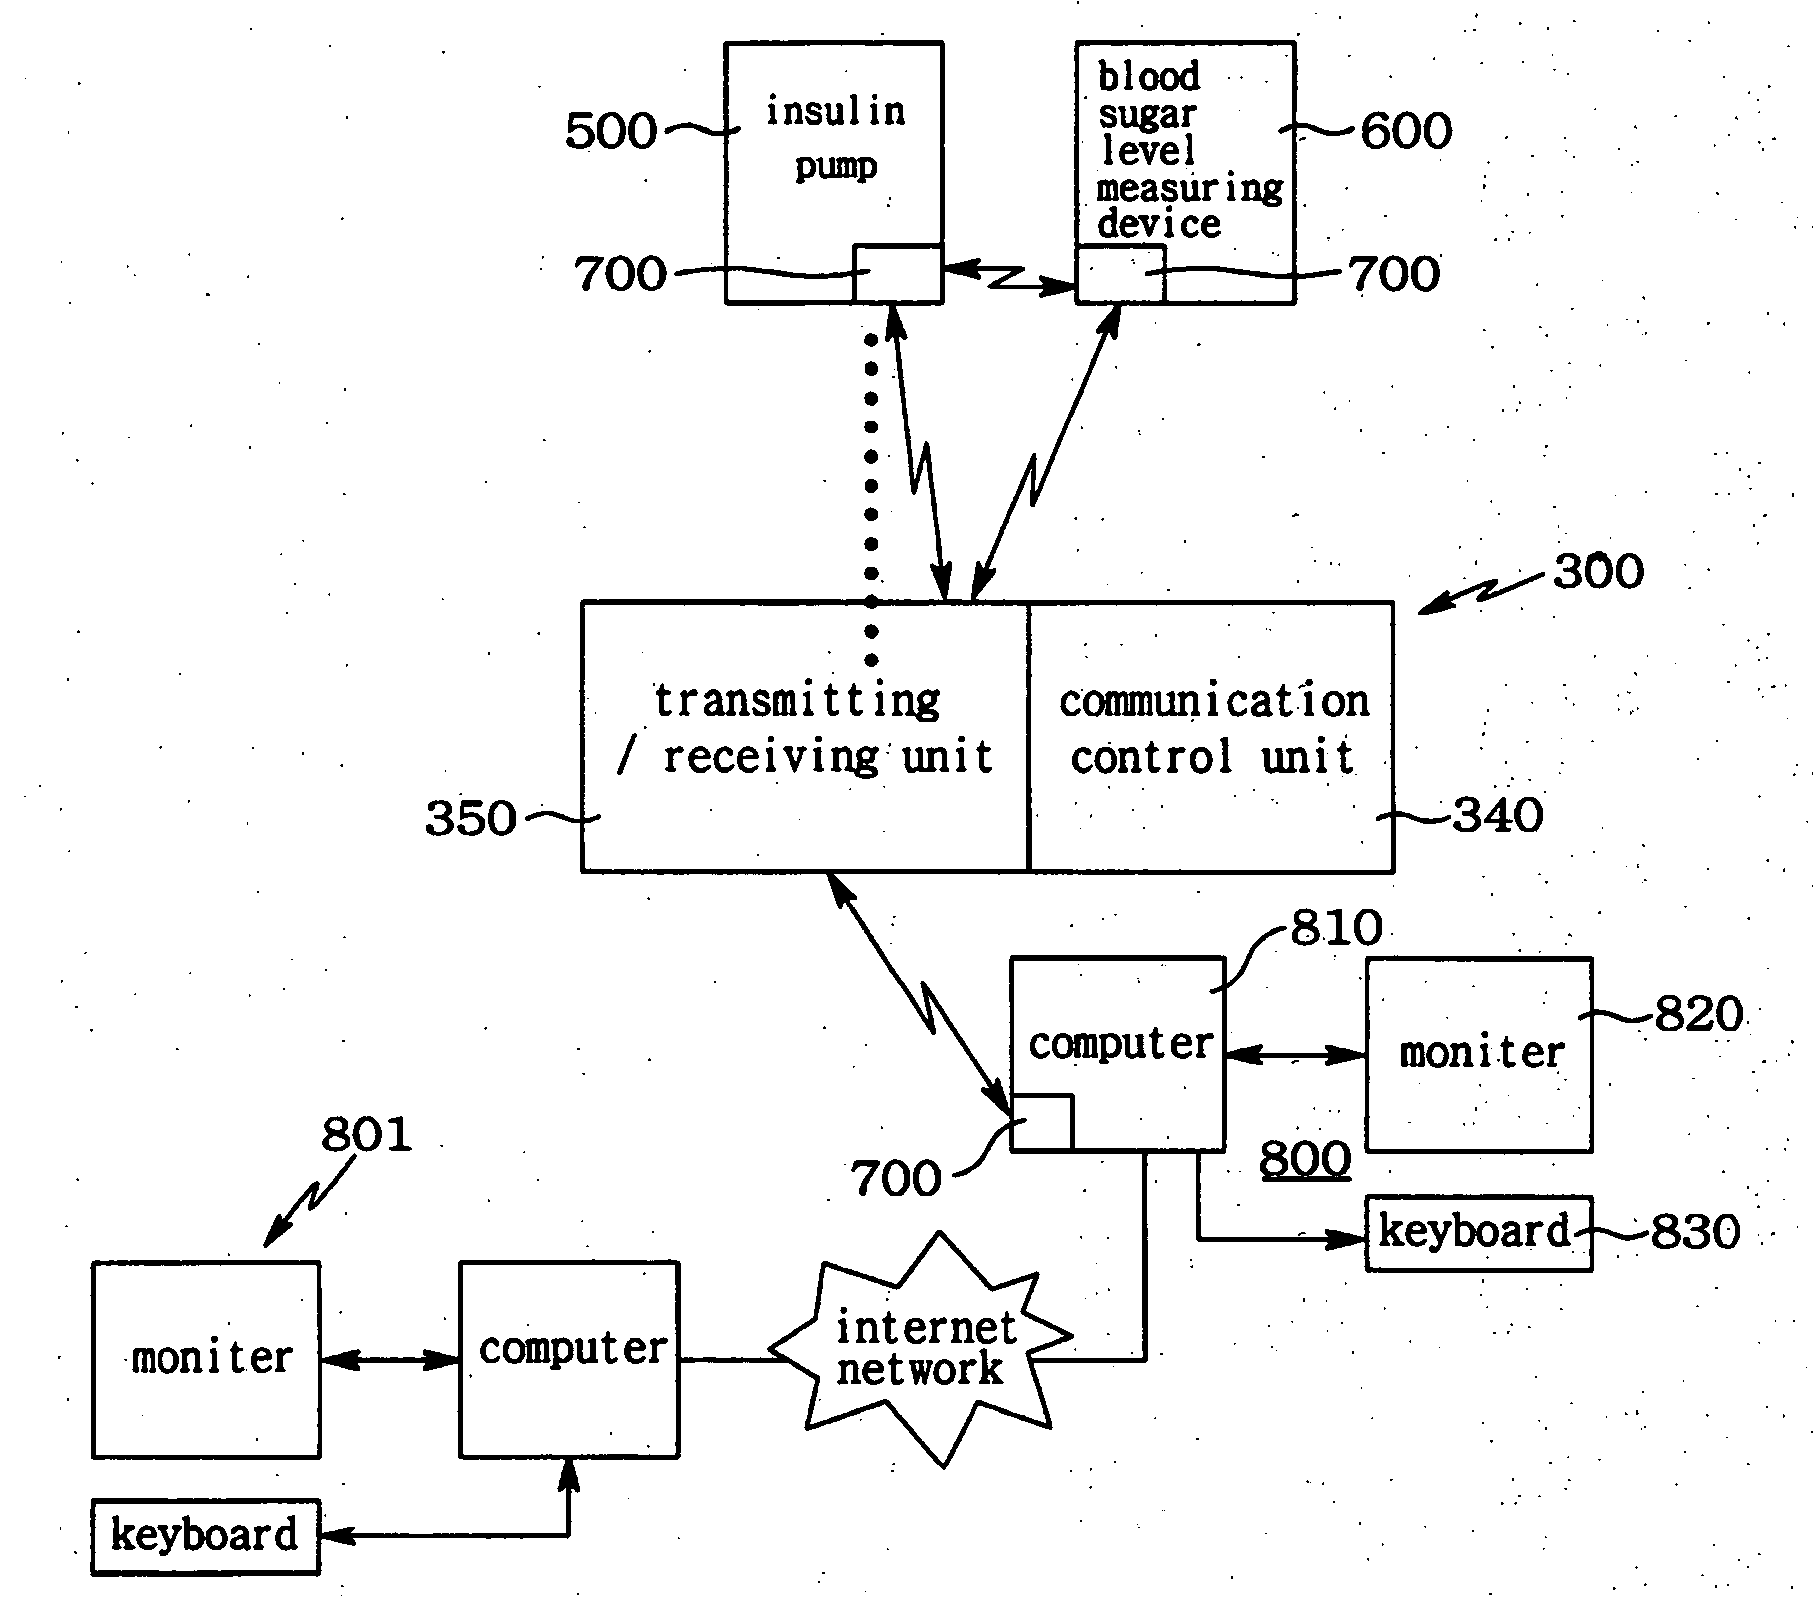 Method for controlling insulin pump using Bluetooth protocol